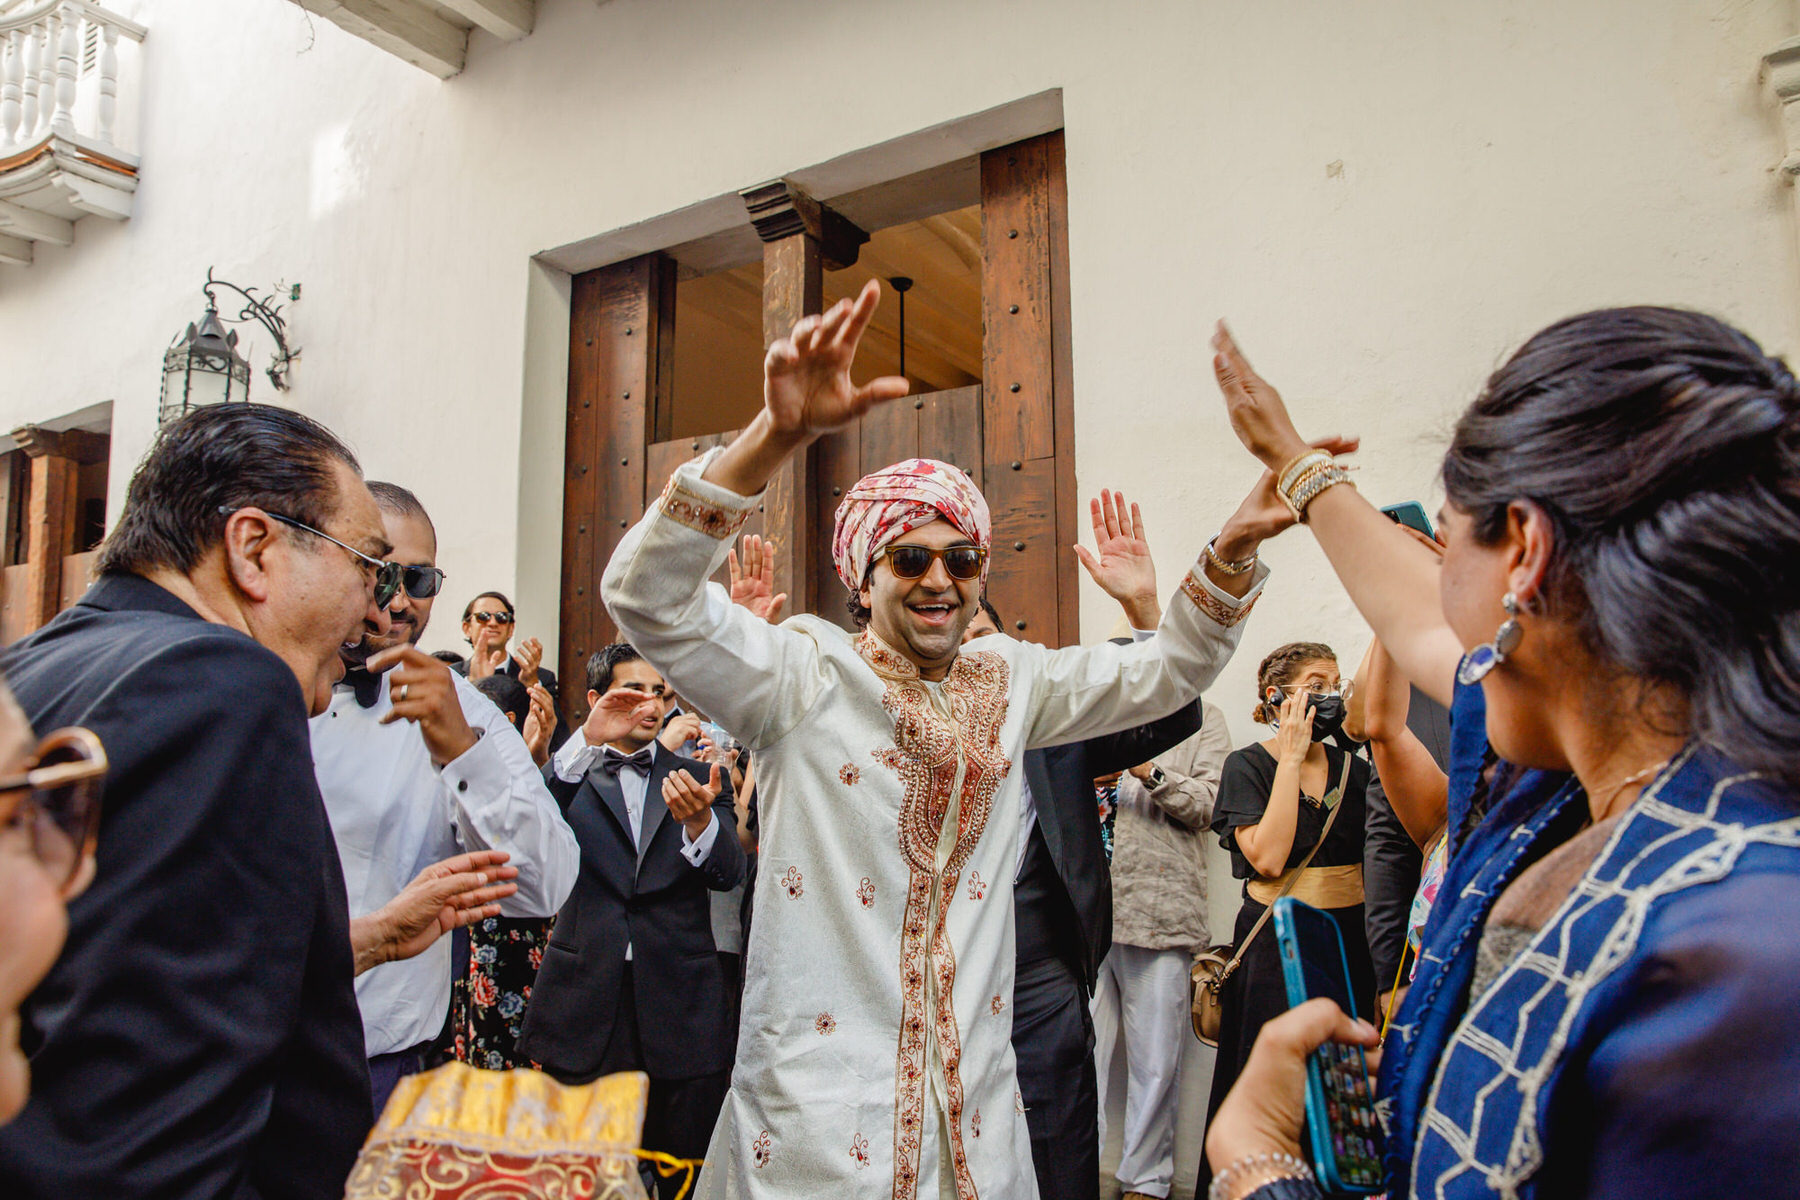 The Groom arriving to the location surrounded by a festive ambiance for his Indian wedding ceremony in Cartagena